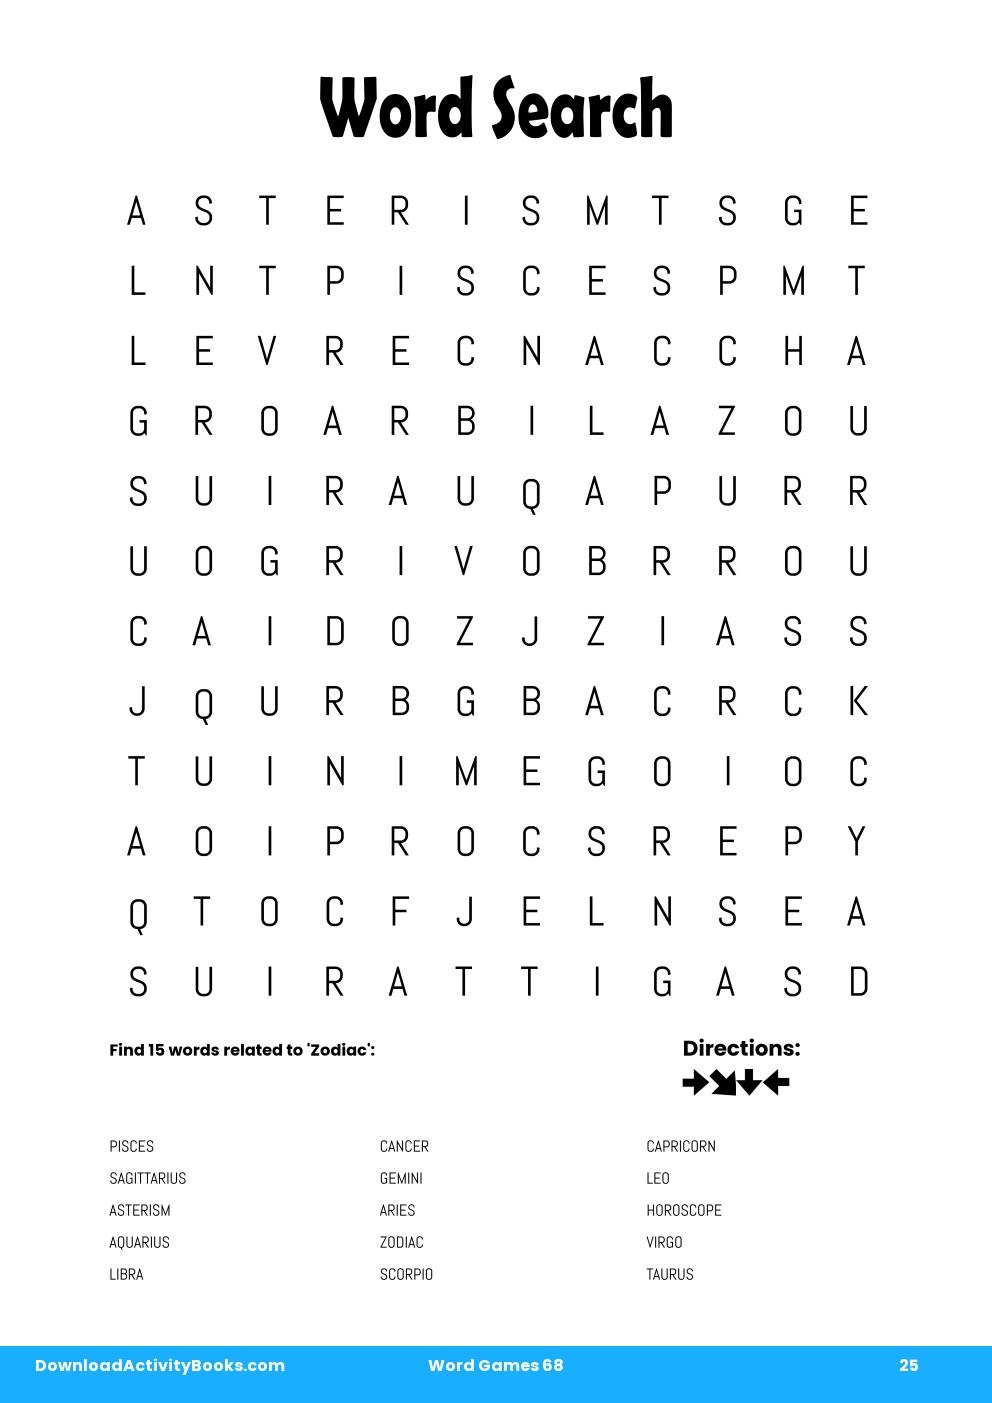 Word Search in Word Games 68